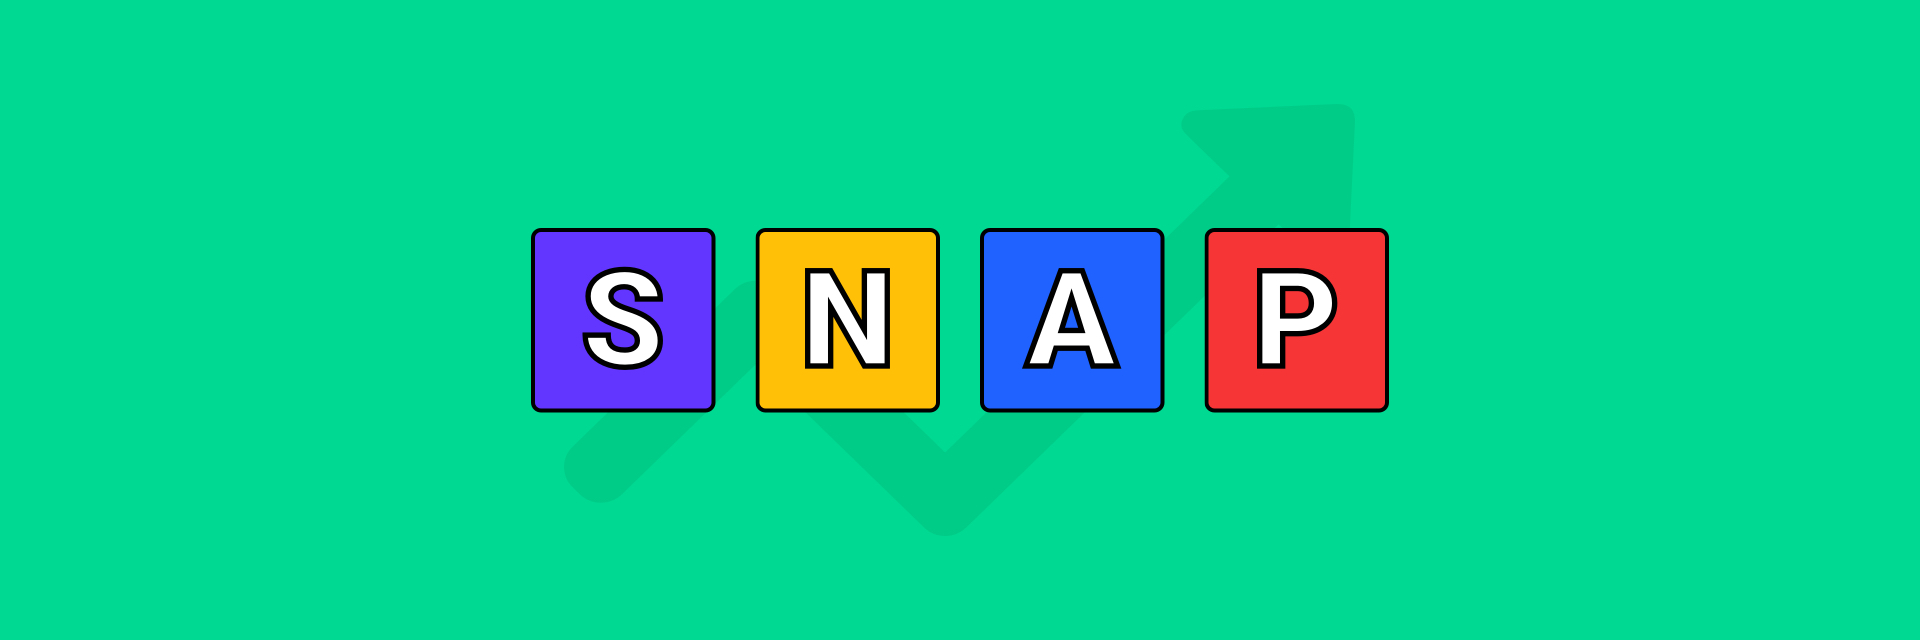 SNAP selling